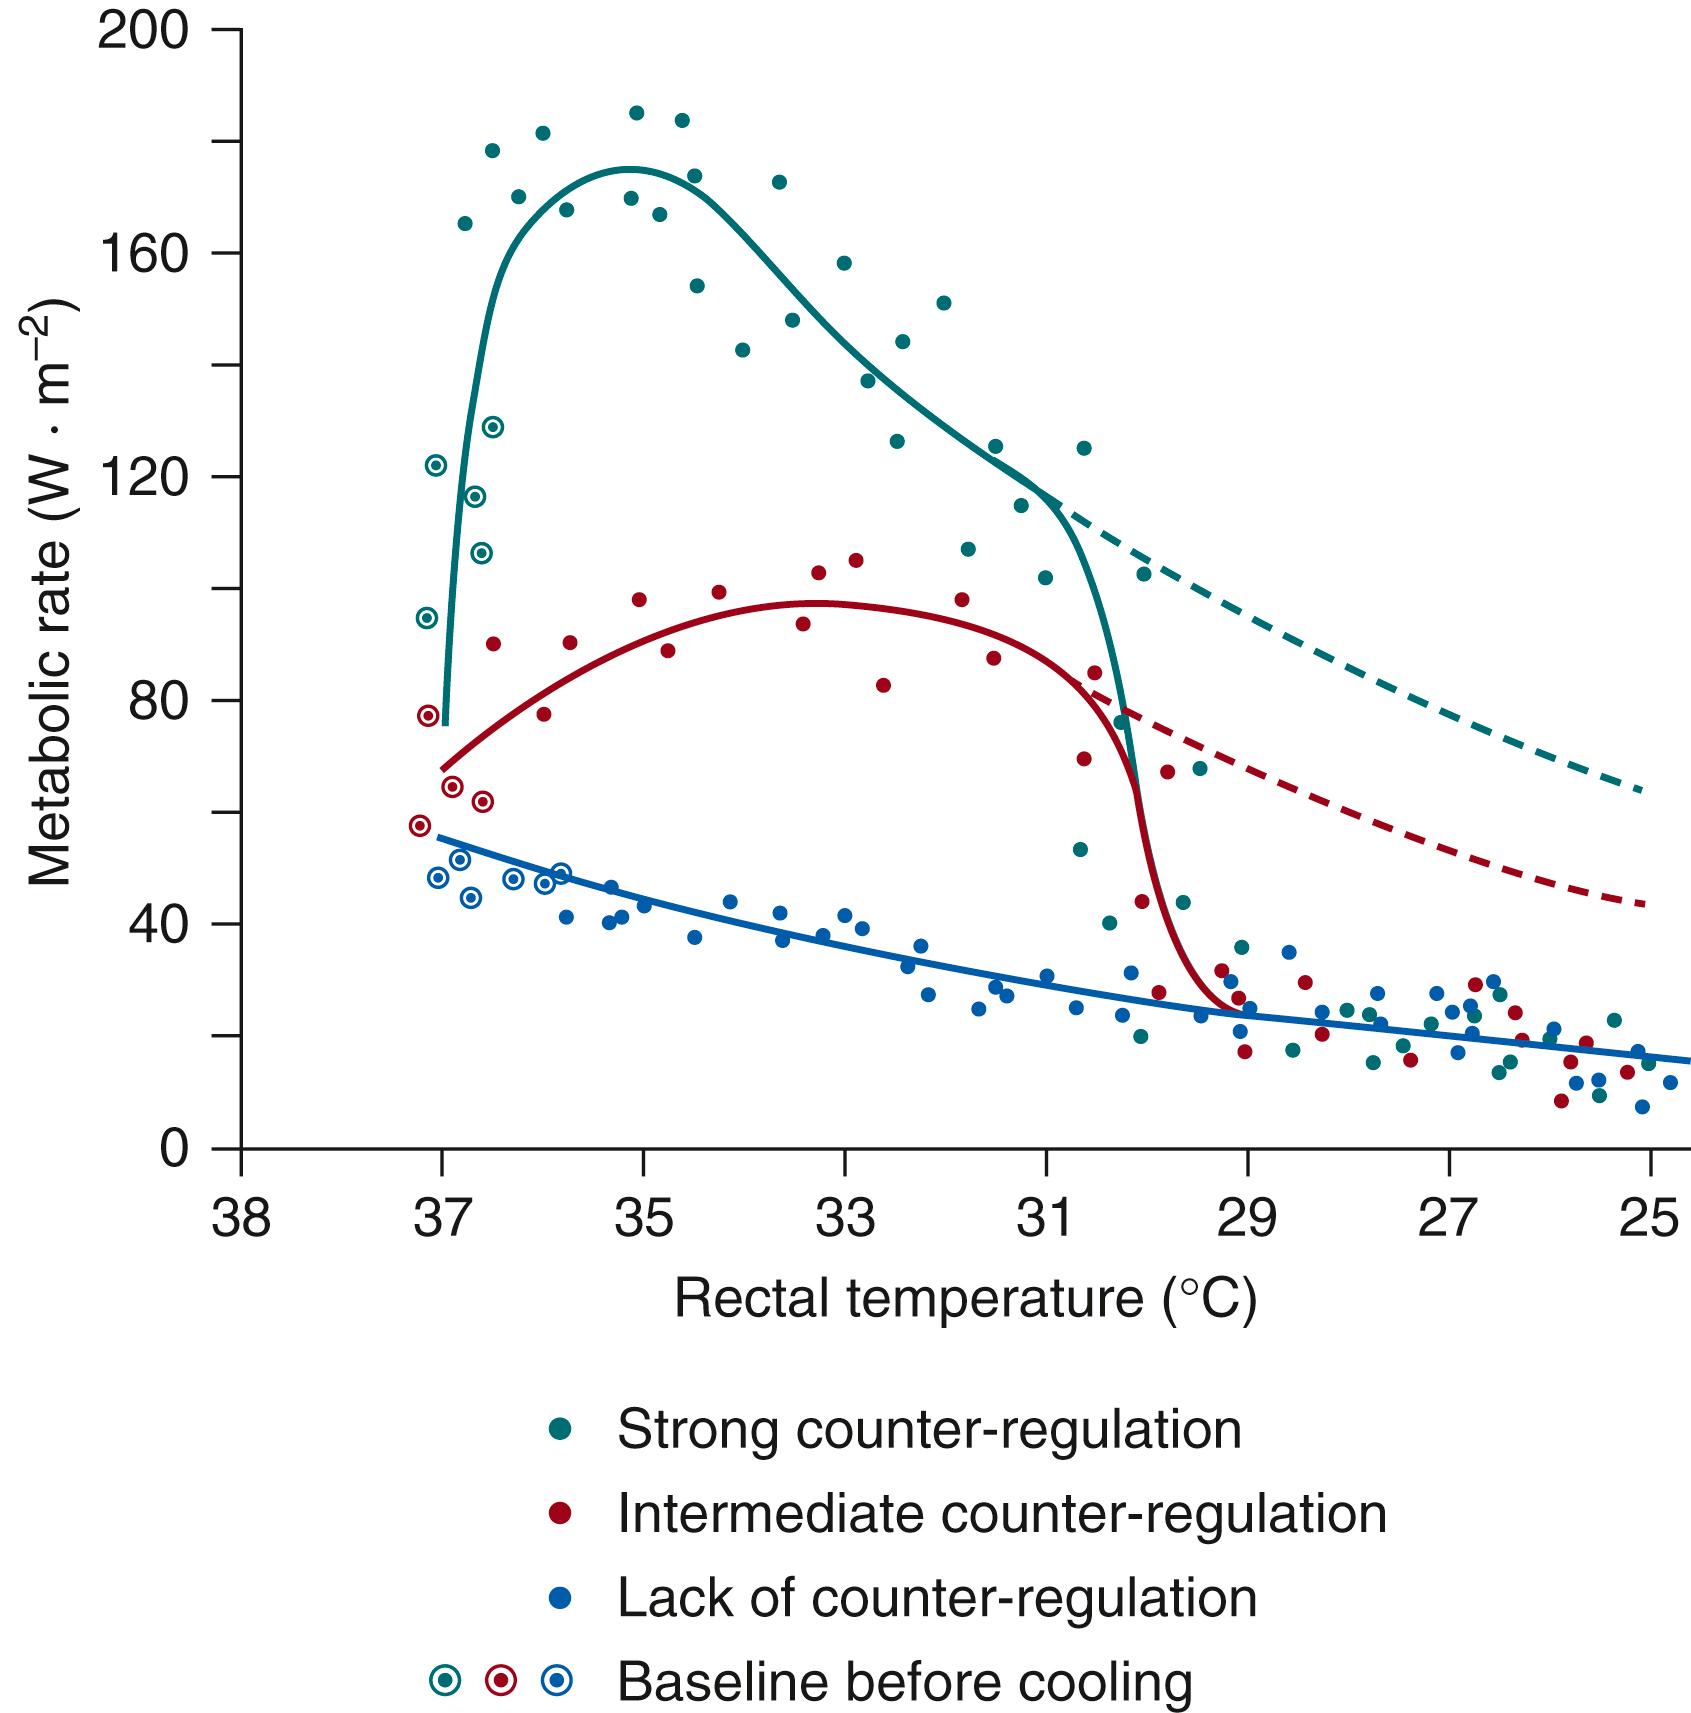 Fig. 42.3, Relationship between metabolic rate and rectal temperature in anesthetized dogs, the body temperatures of which were manipulated by intravascular heat exchangers. Top curve , blue circles : Light anesthesia; thus a marked cold-induced increase in heat production with decreasing body temperature was observed. Middle curve , red circles : Moderate anesthesia; the response of heat production to cooling is reduced. Lower curve , green circles : Deep anesthesia; there is no cold defense reaction. Black circles : Baseline values before initiation of cooling. After having reached a maximum, thermoregulatory heat production follows van’t Hoff’s law. Note that the upper and middle curves tend to approach the lower curve as soon as the rectal temperature drops below a critical temperature (about 30°C).